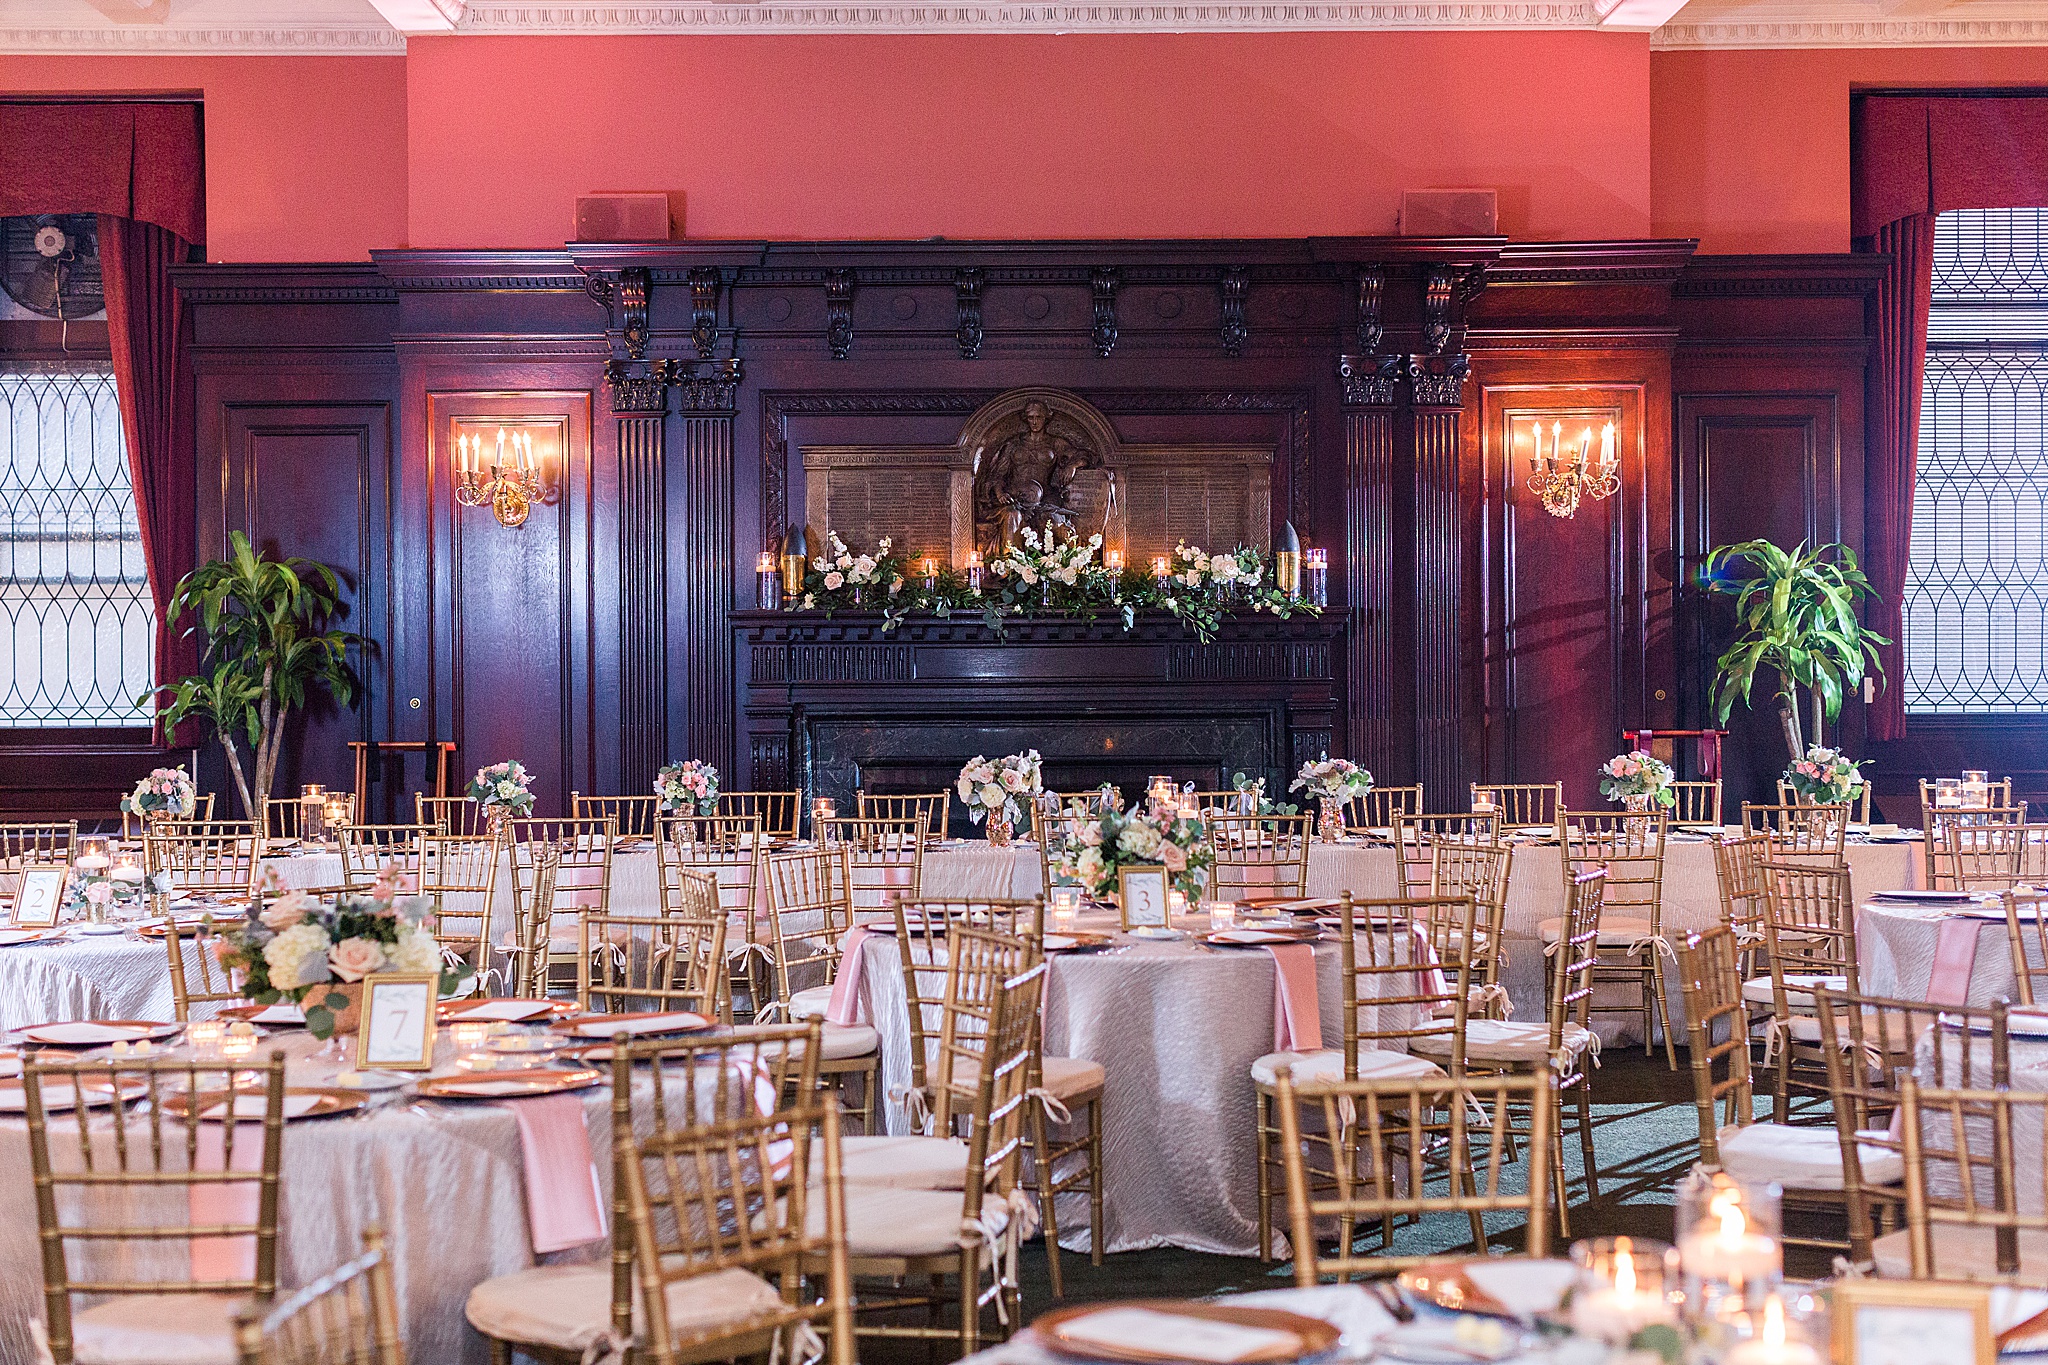 Baltimore MD wedding reception photographed by Alexandra Mandato Photography